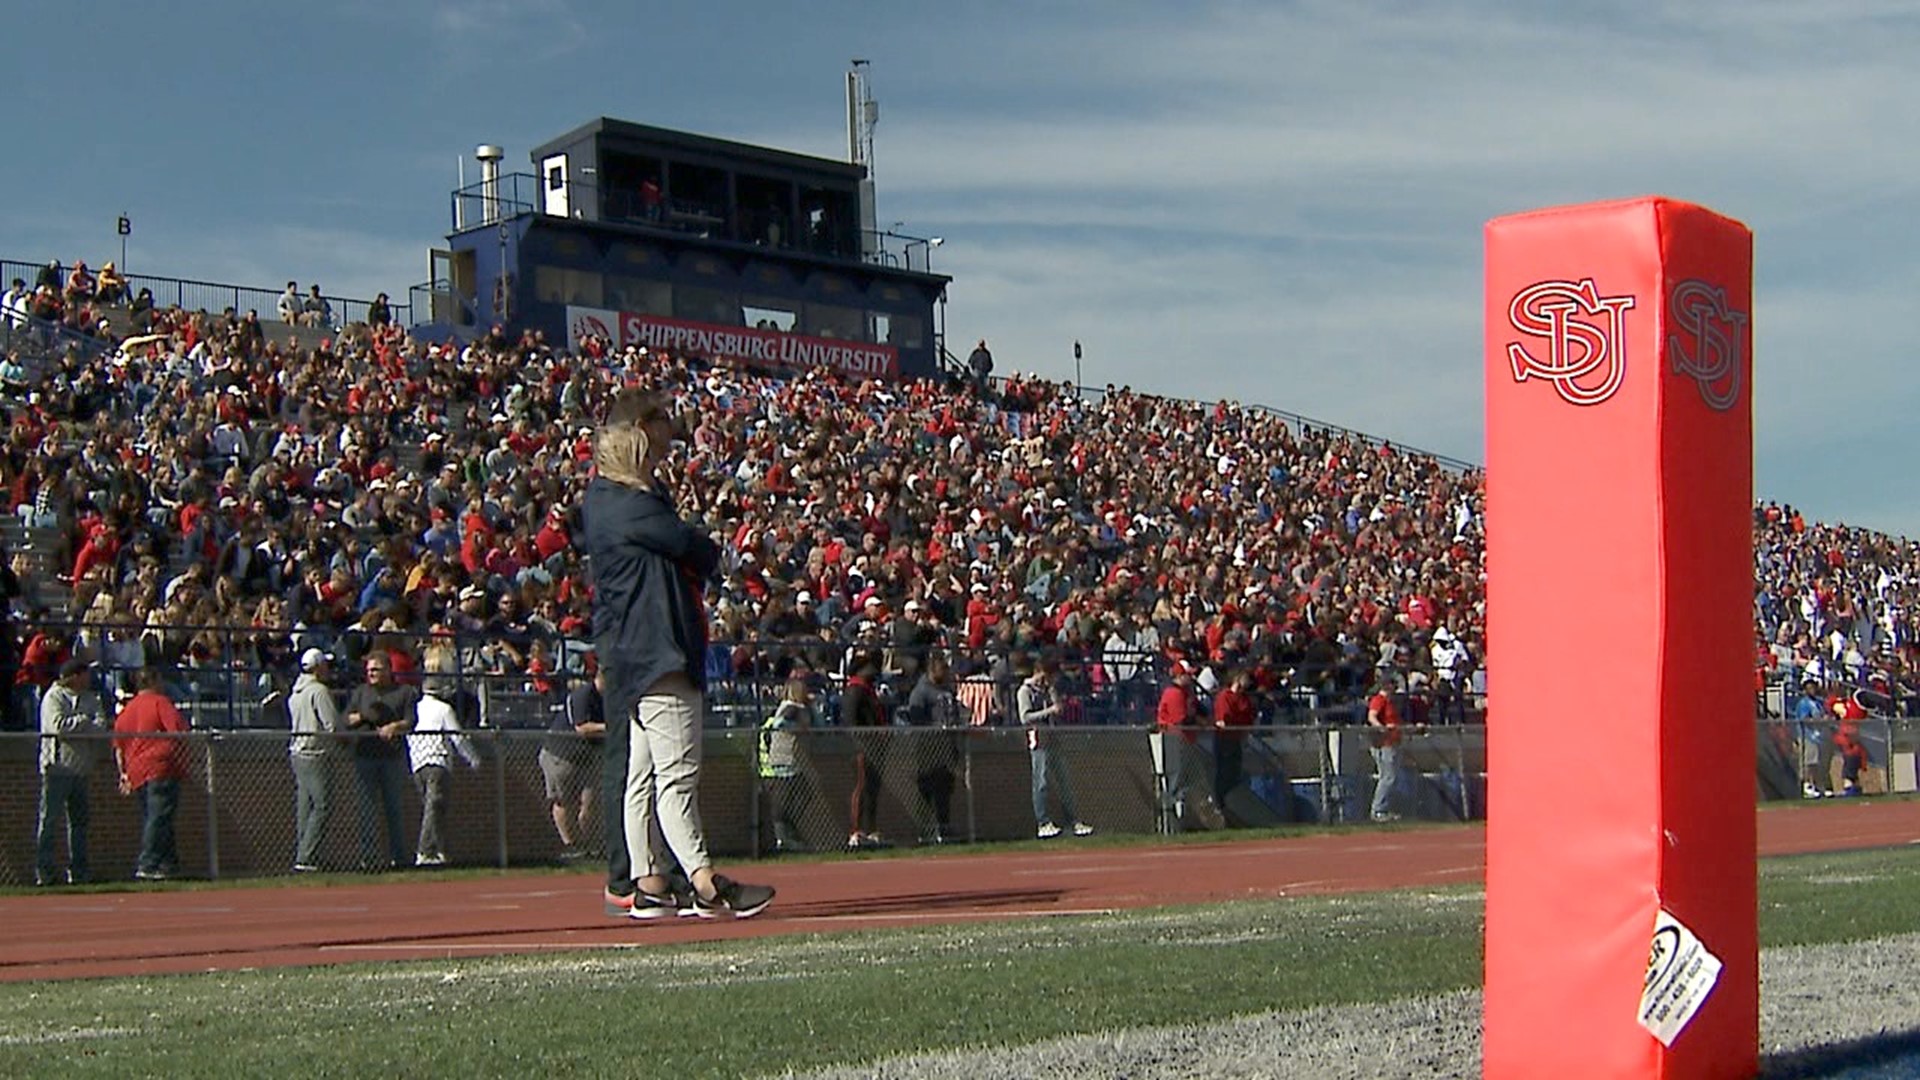 Shippensburg AD Jeff Michaels talks about the PSAC's decision to suspend fall competition.